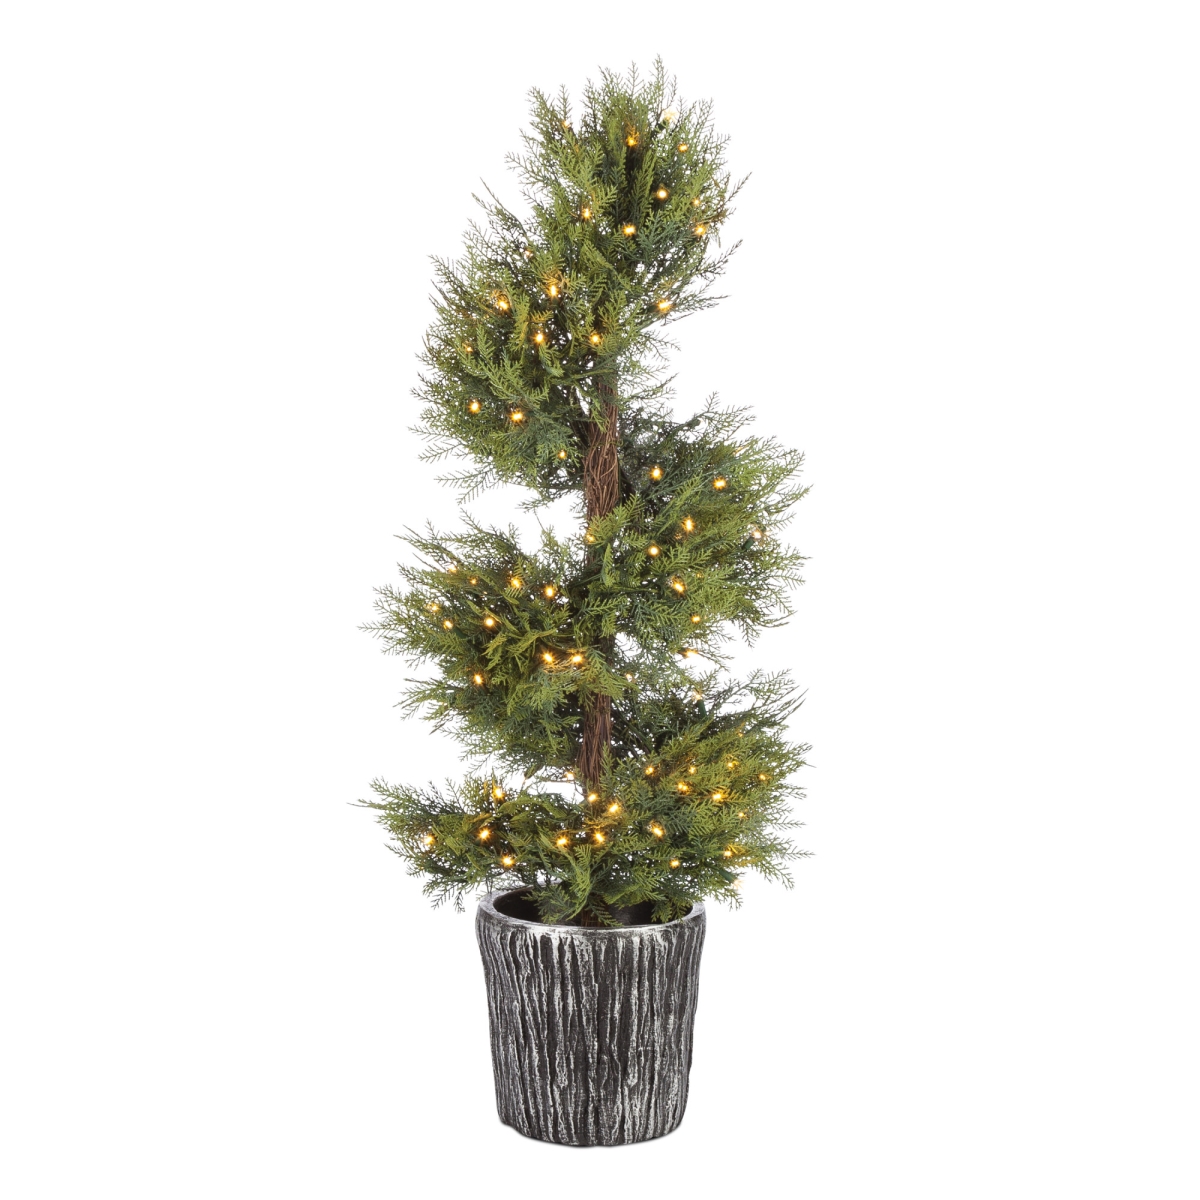 Gerson 5256-40wwlede 4 Ft. Pre-lit Potted Cedar Spiral Tree With 100 Warm White Led Lights - Green